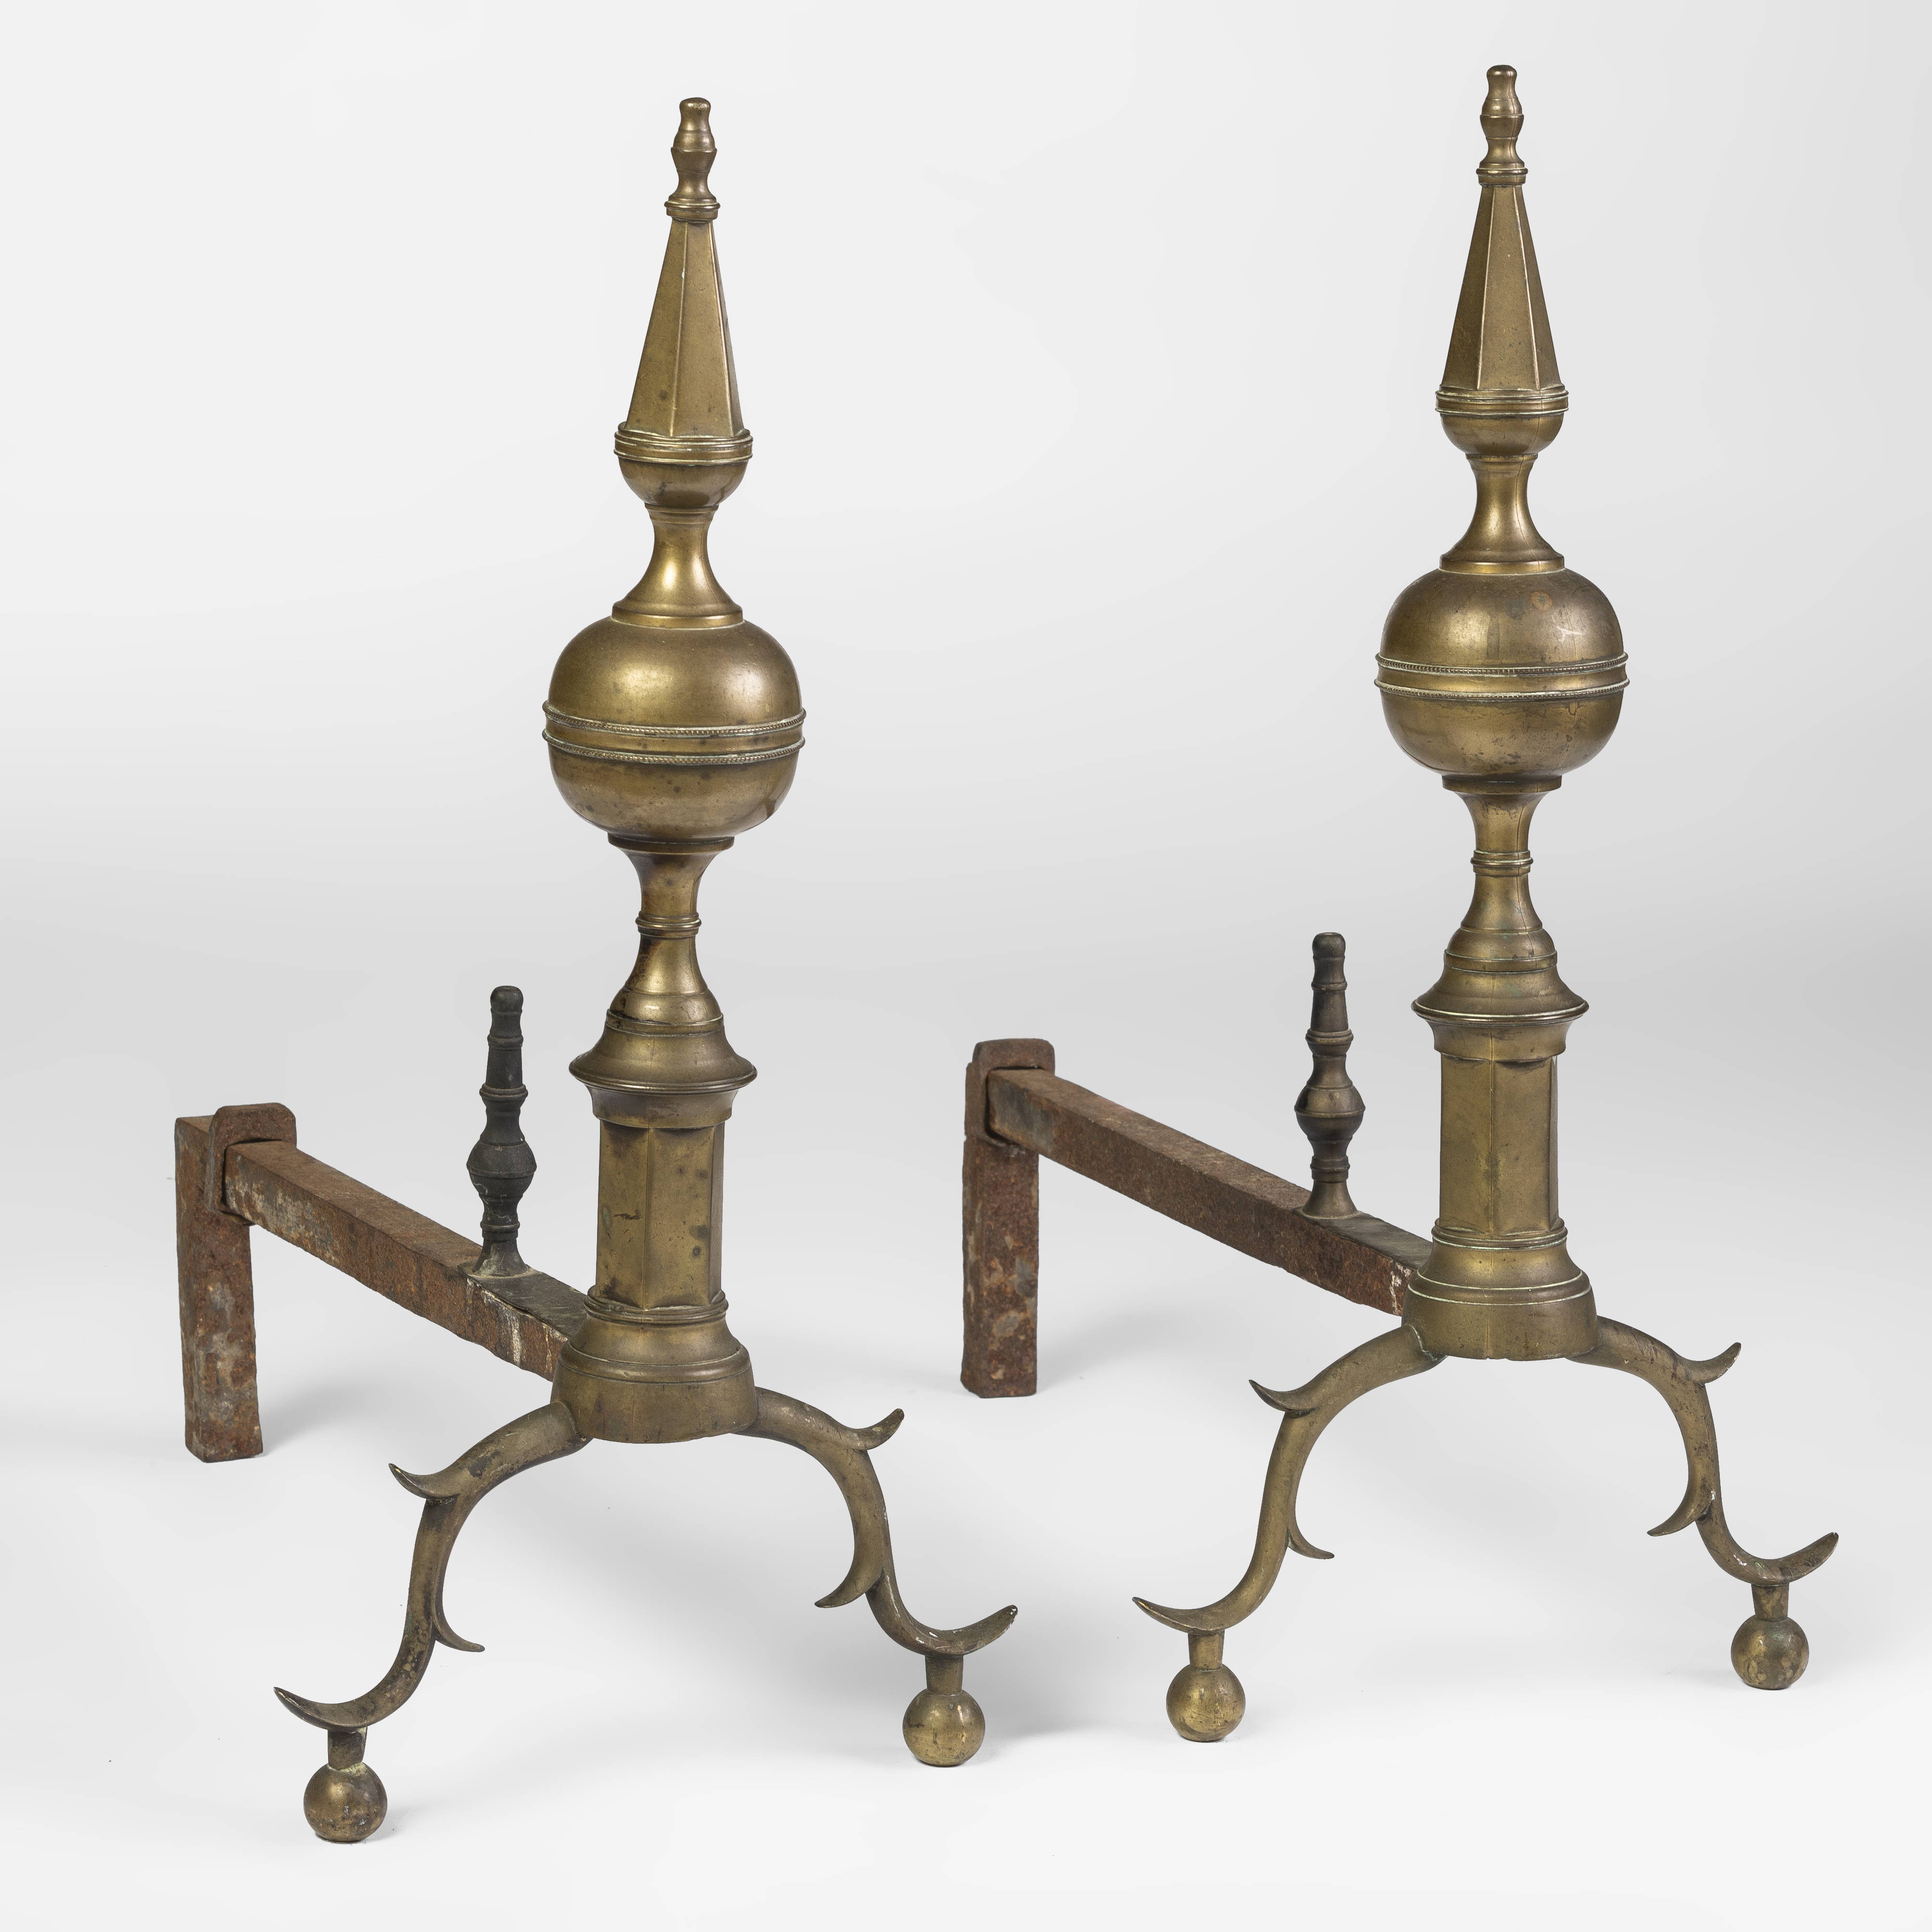 A fine quality pair of 'steeple-top' andirons 